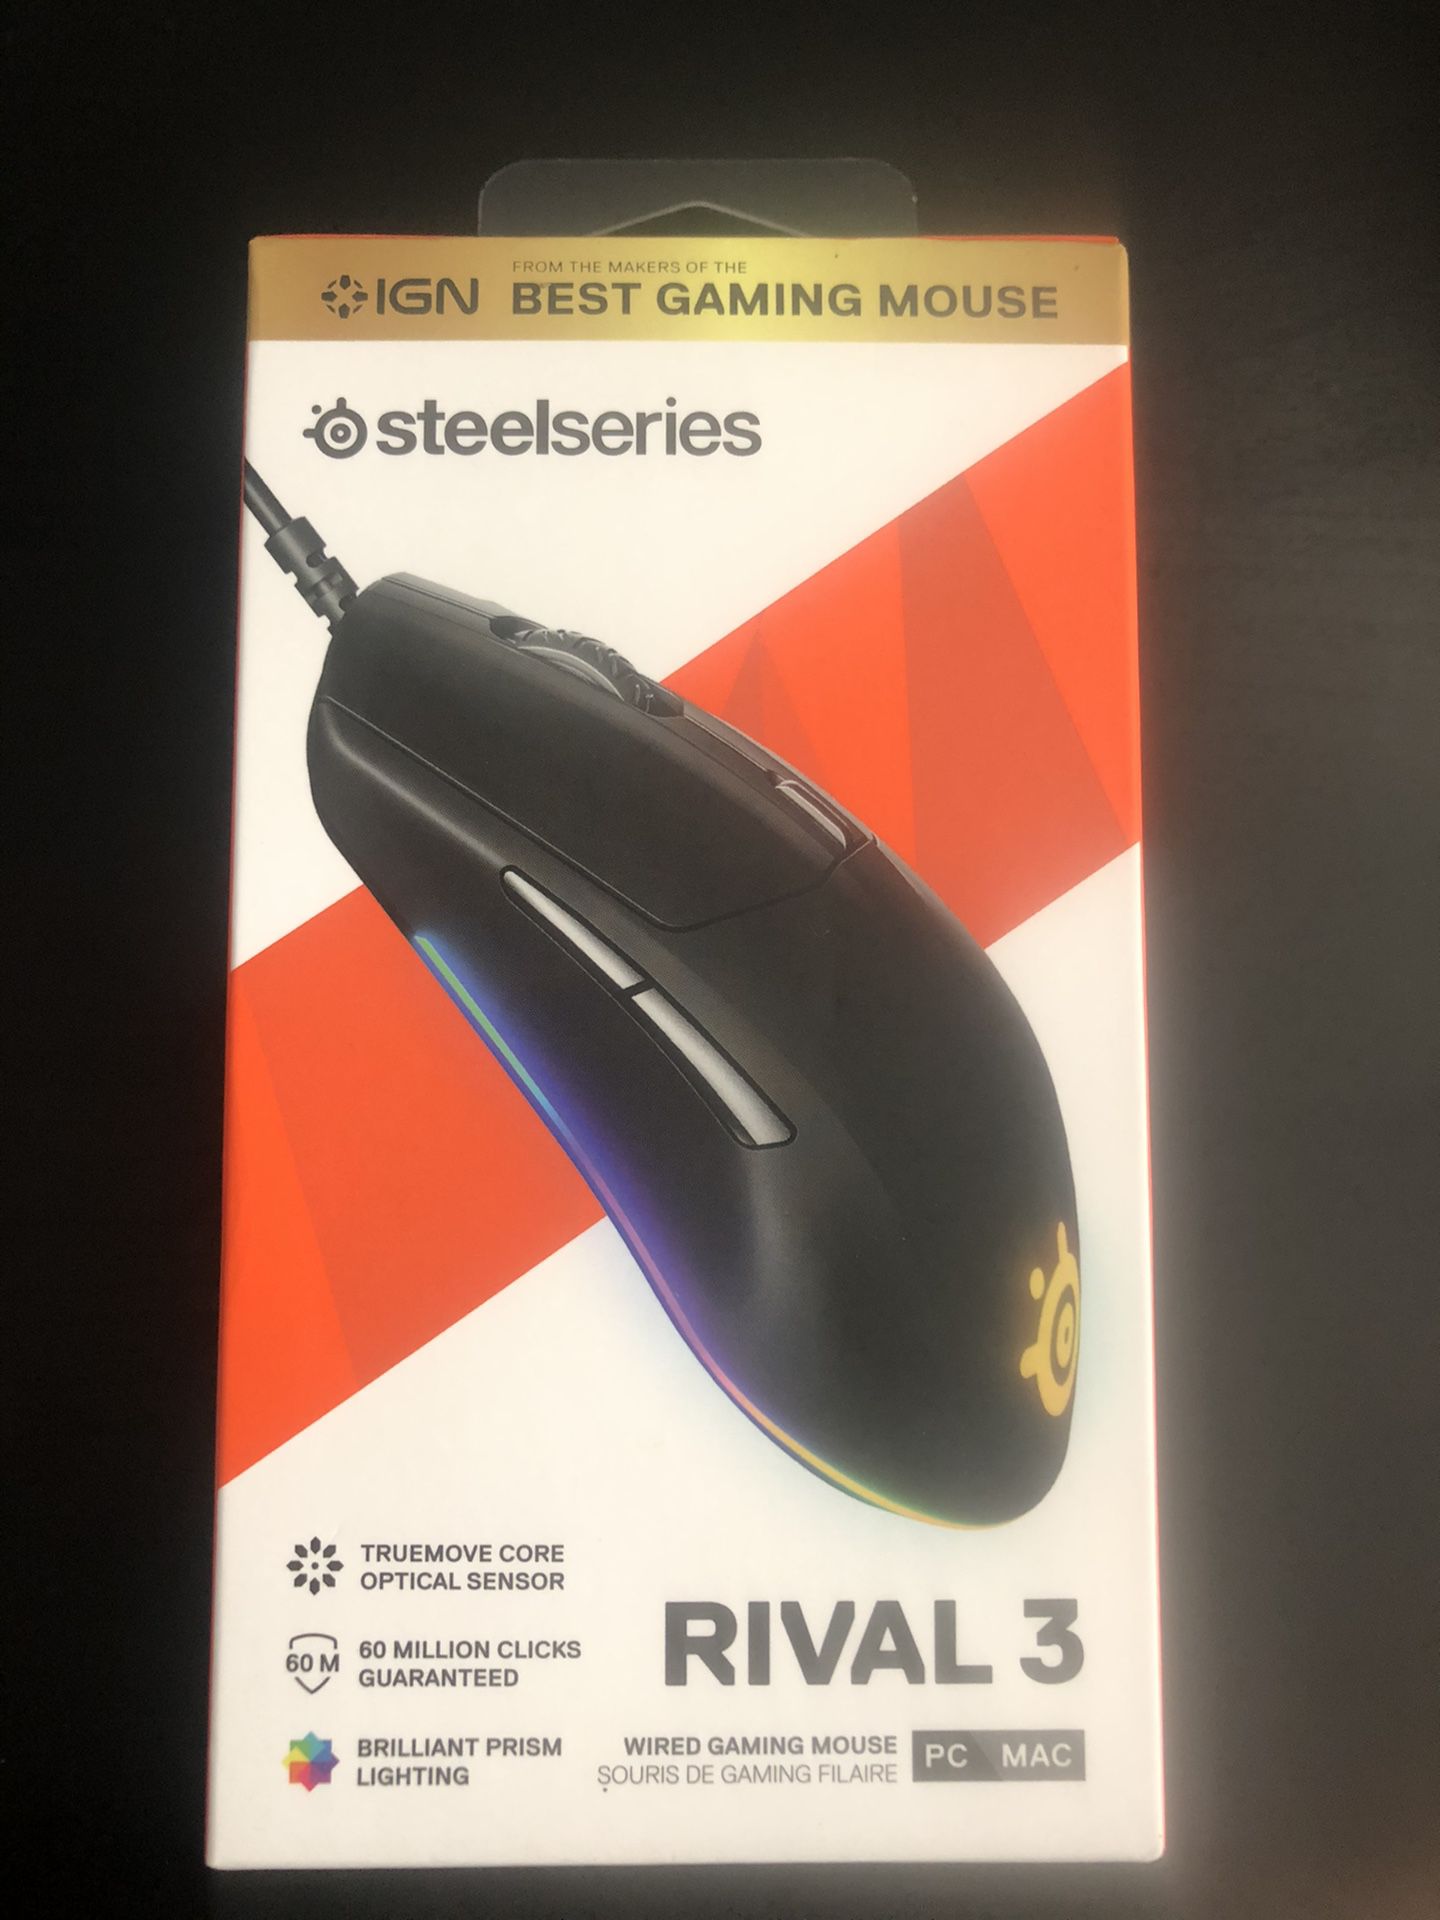 steelseries Rival 3 gaming mouse